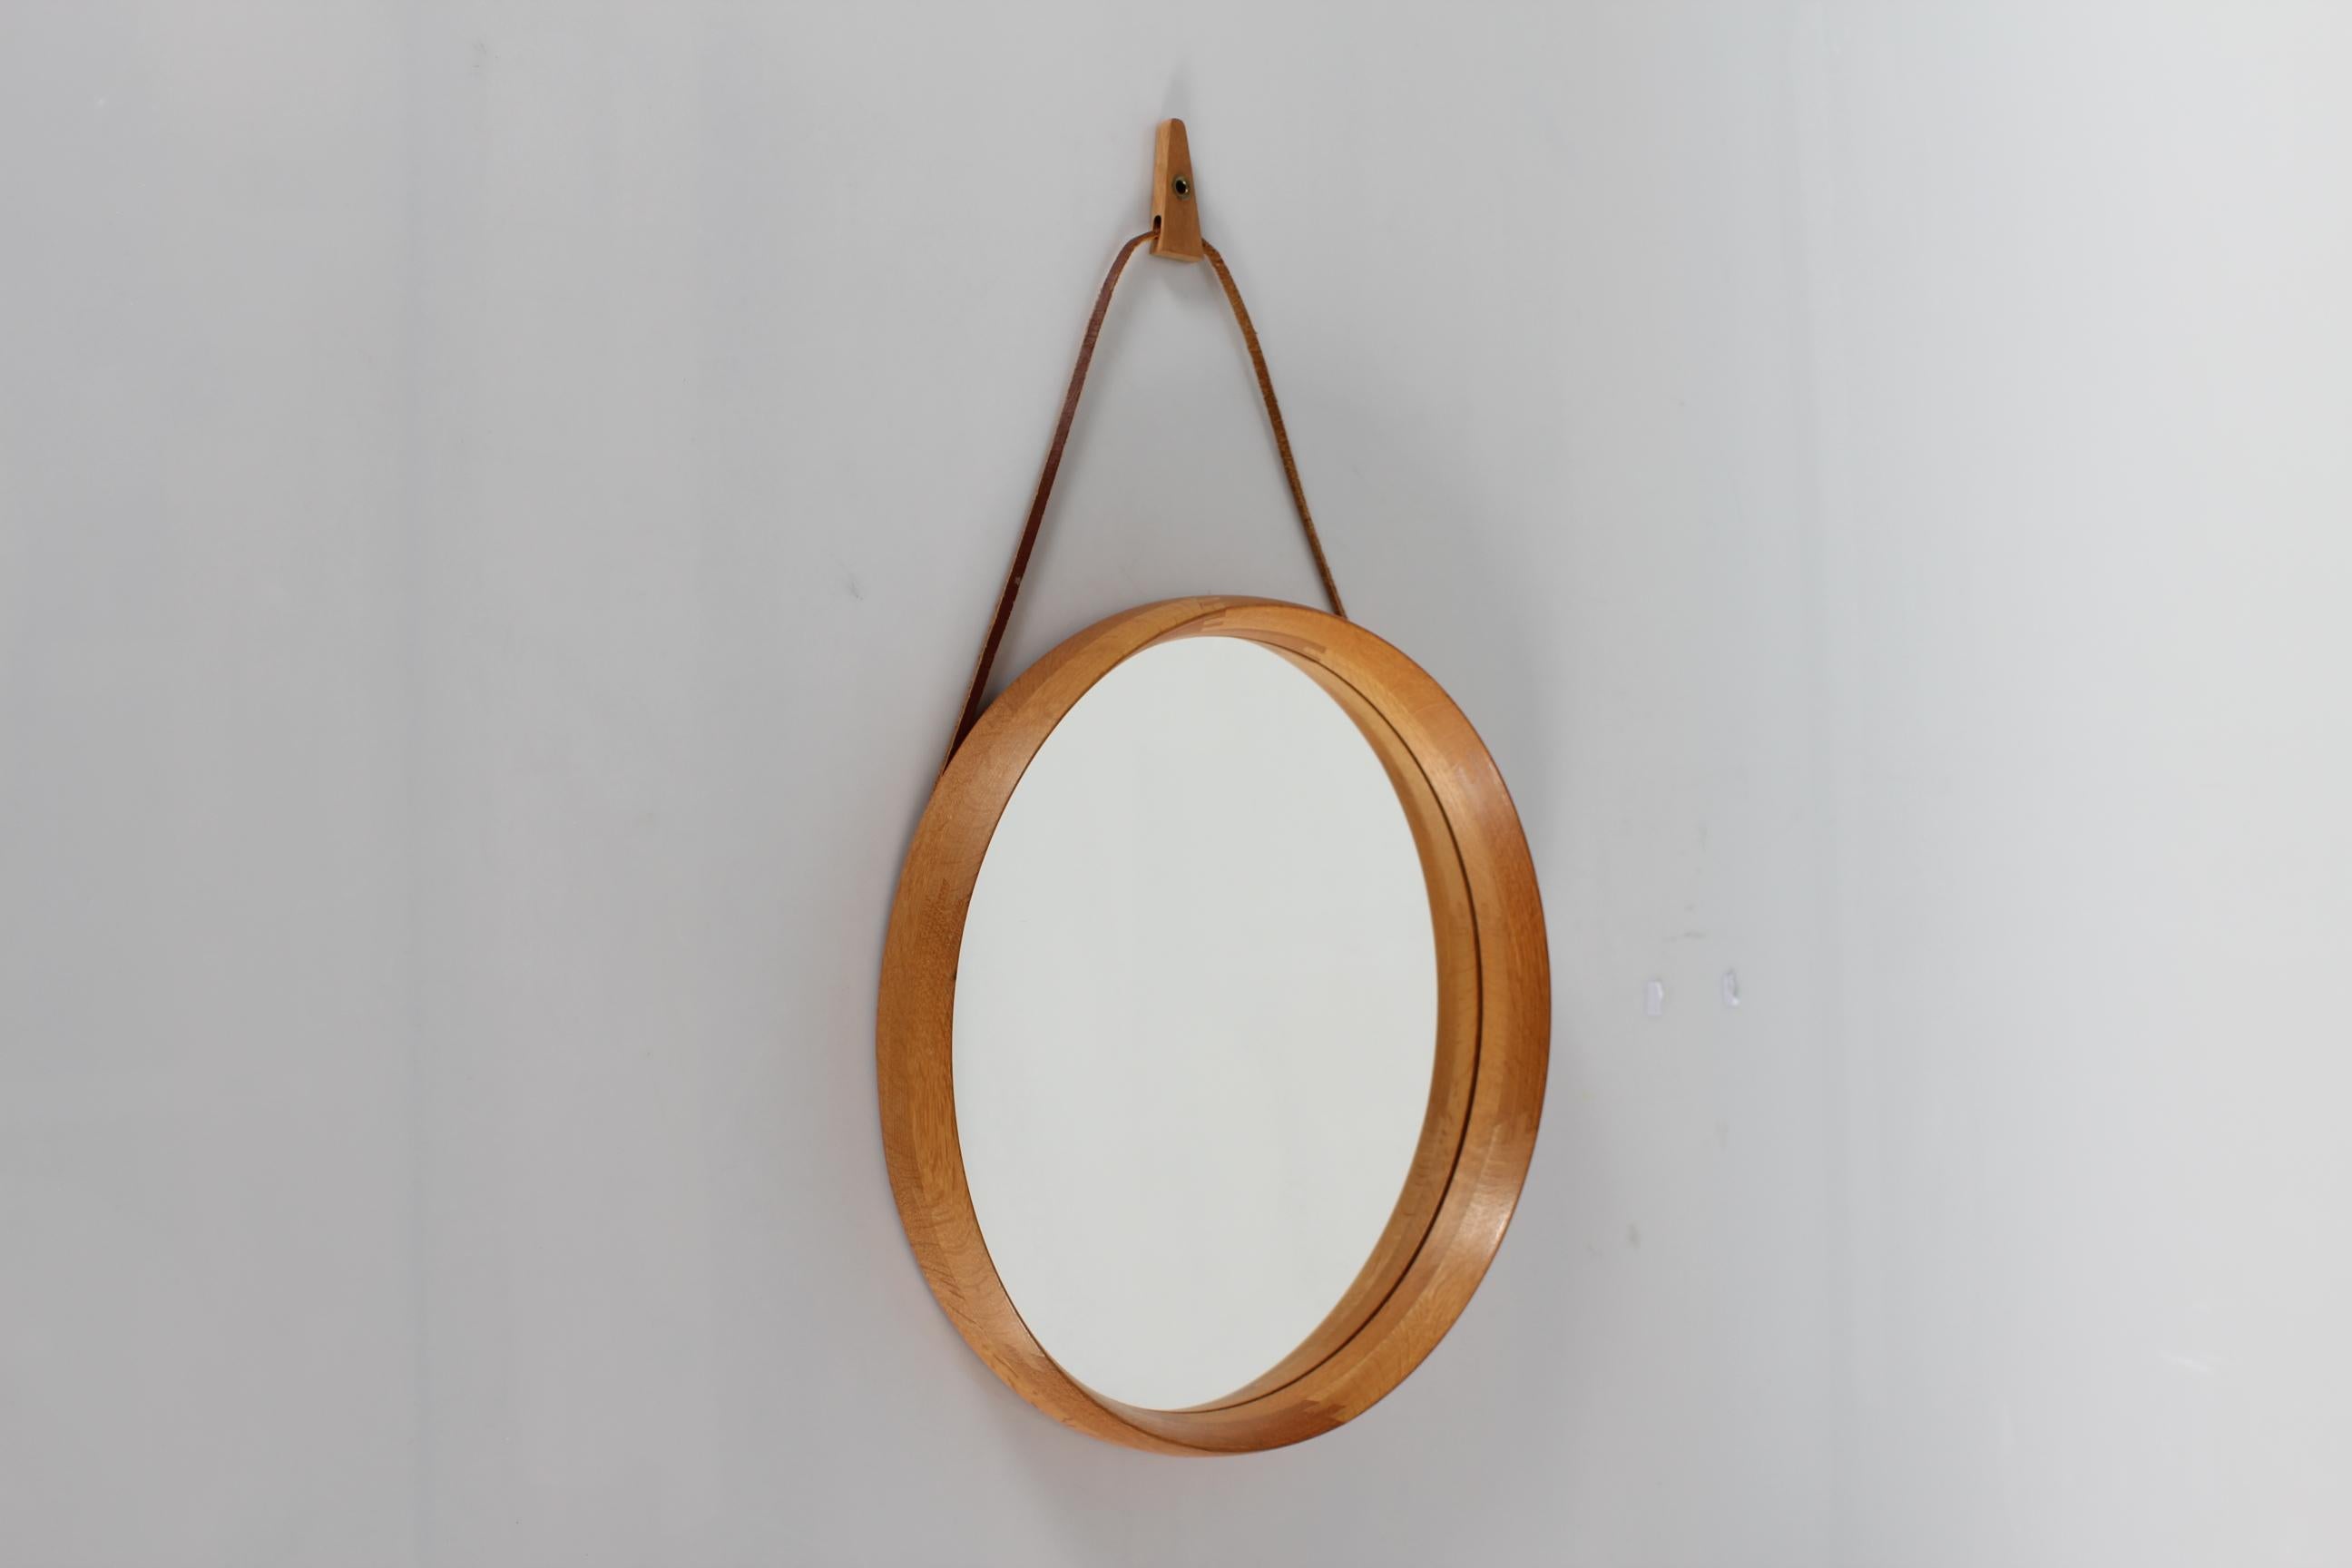 Uno and Osten Kristiansson round wall mirror made of solid oak by Luxus Vittsjö in Sweden in the 1970s. 
The mirror is made of solid oak with visible joints and a light fitting frame.
A small piece of oak wood is mounted on the leather strap for